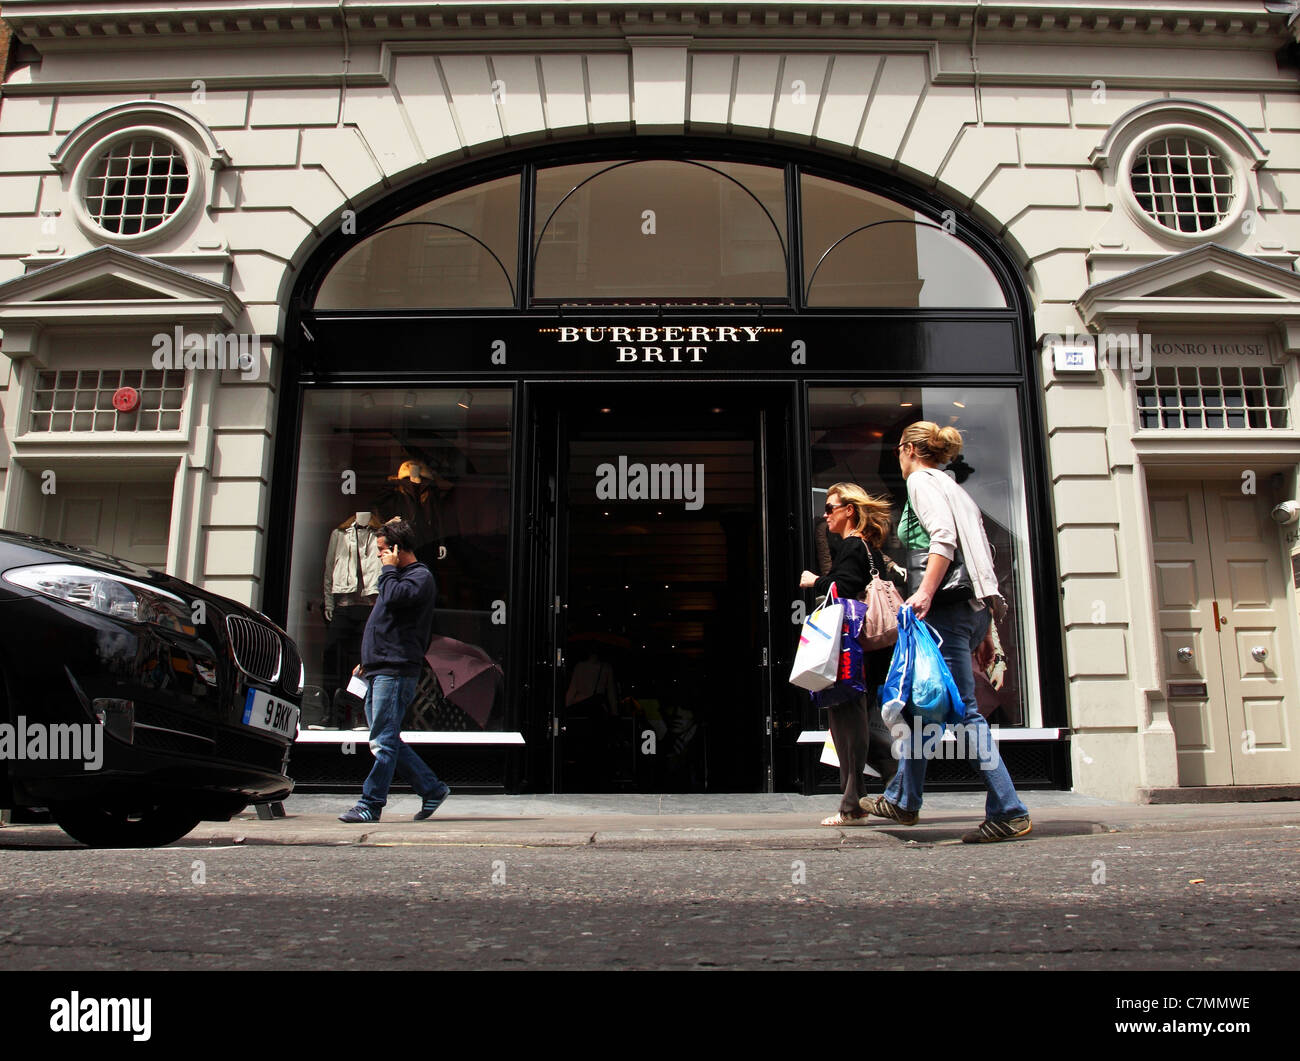 A Burberry Brit store in New Row, Covent Garden, London WC2, England, U.K Stock Photo